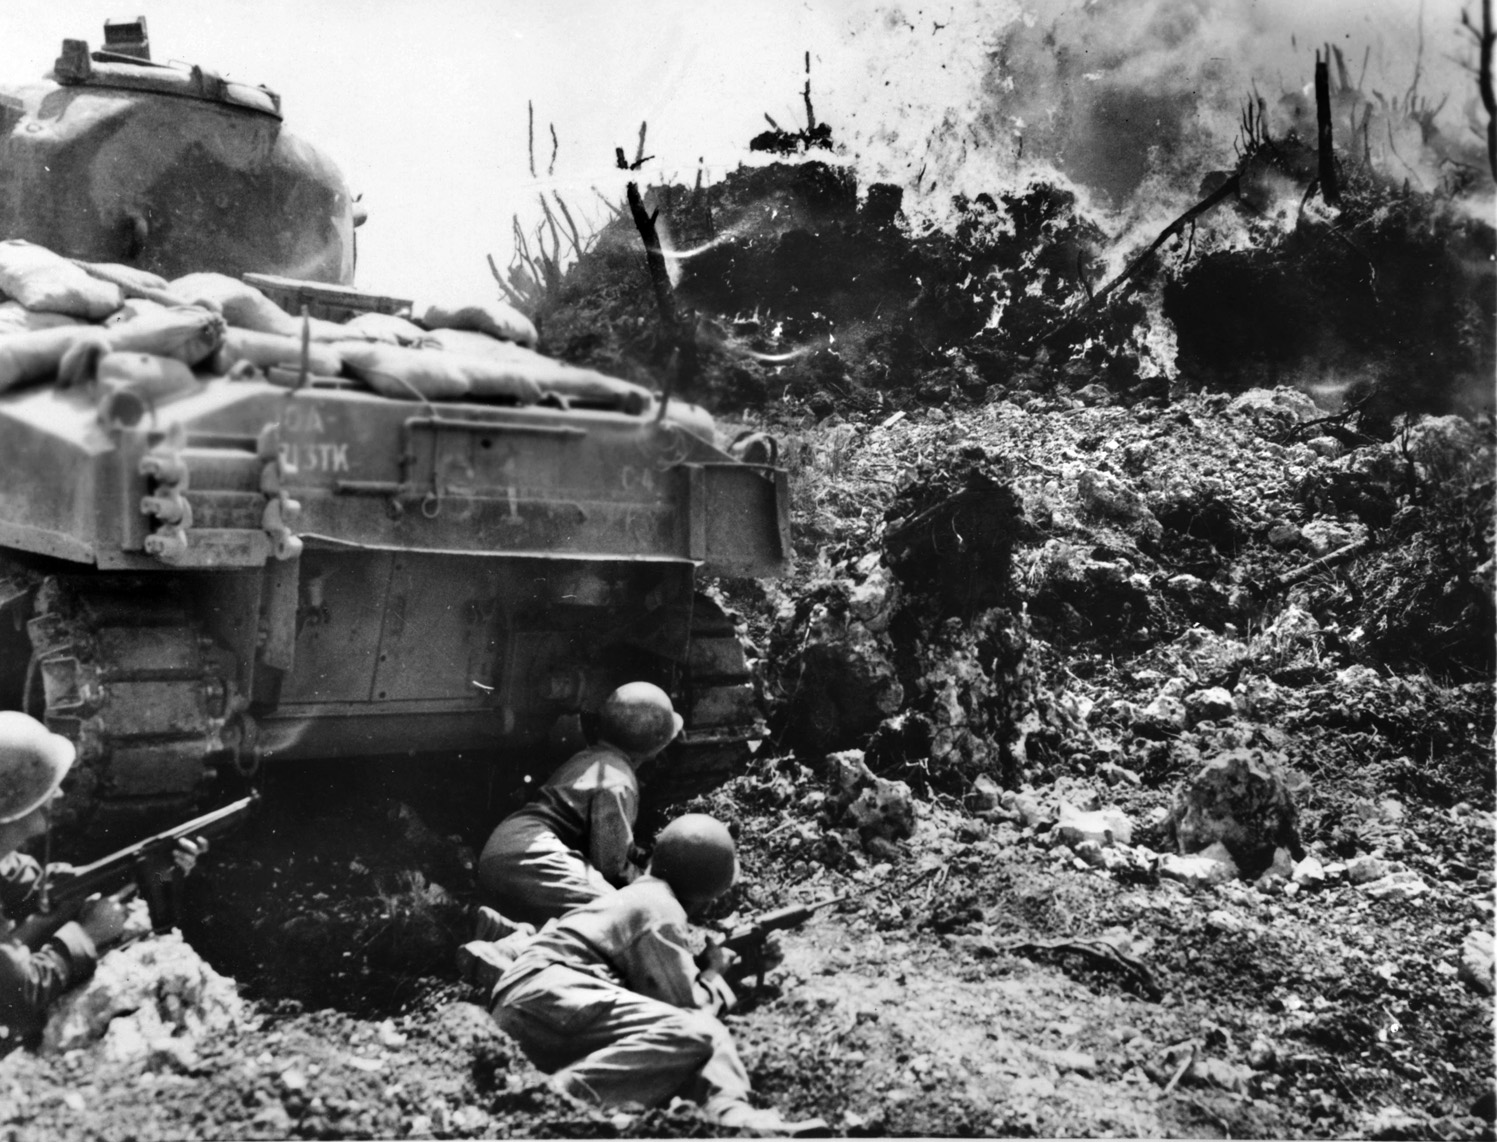 A flamethrowing Sherman tank of the U.S. Army’s 713th Tank Battalion provides cover for advancing infantrymen on Okinawa. The Japanese defenders had fortified the island with three concentric lines of defense and fought grimly to exact a heavy toll in American lives. 